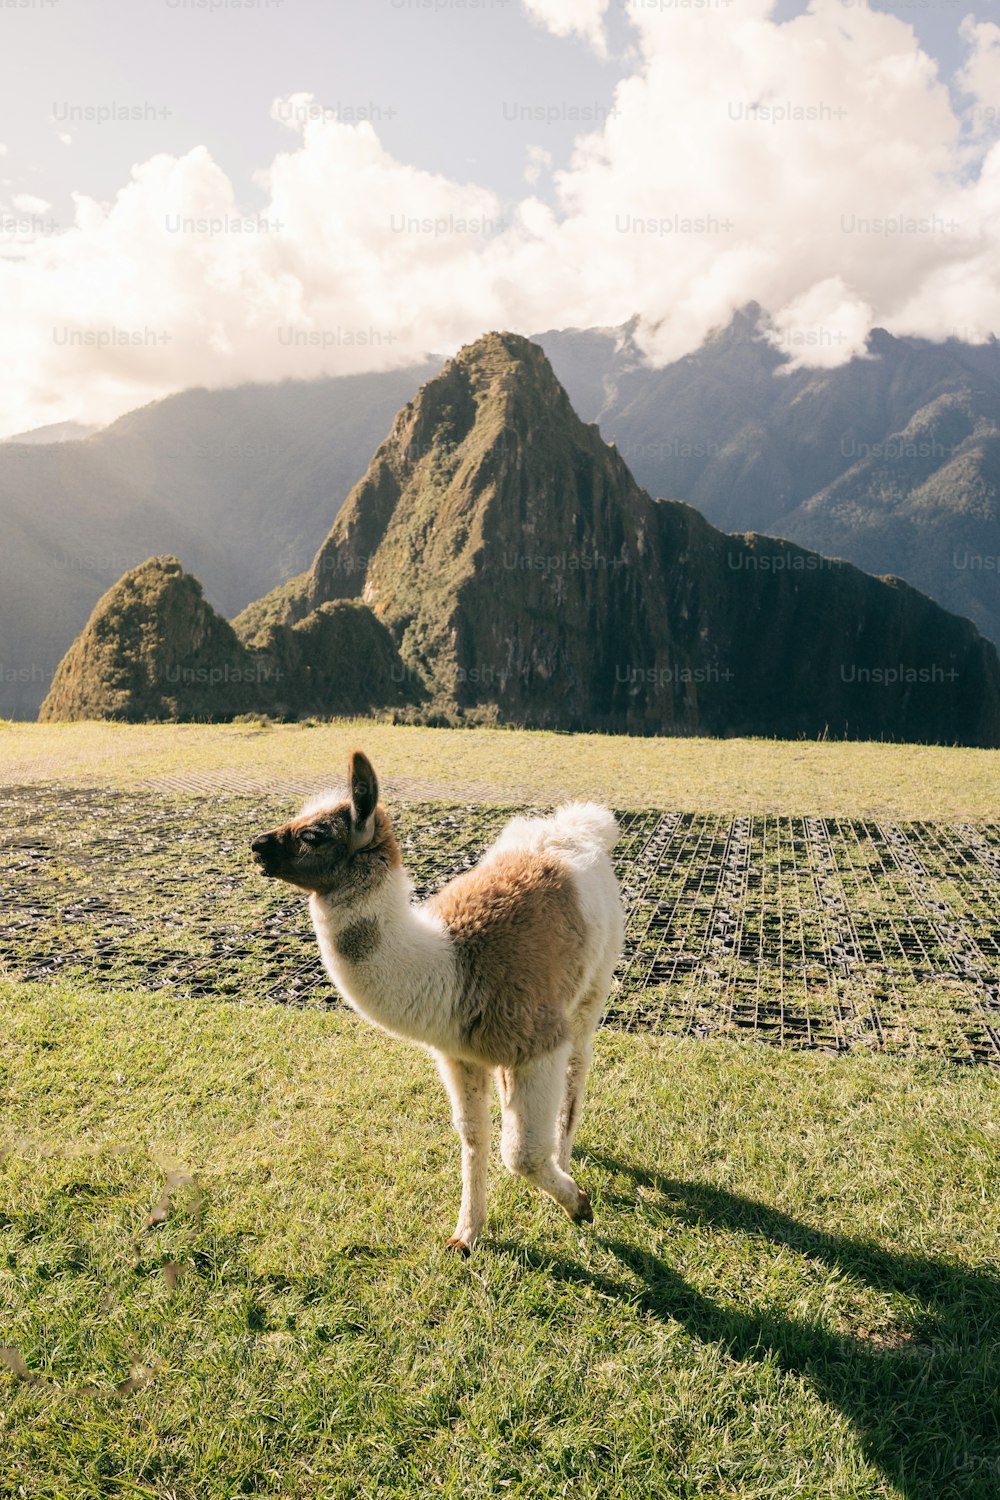 a llama standing in a field with mountains in the background